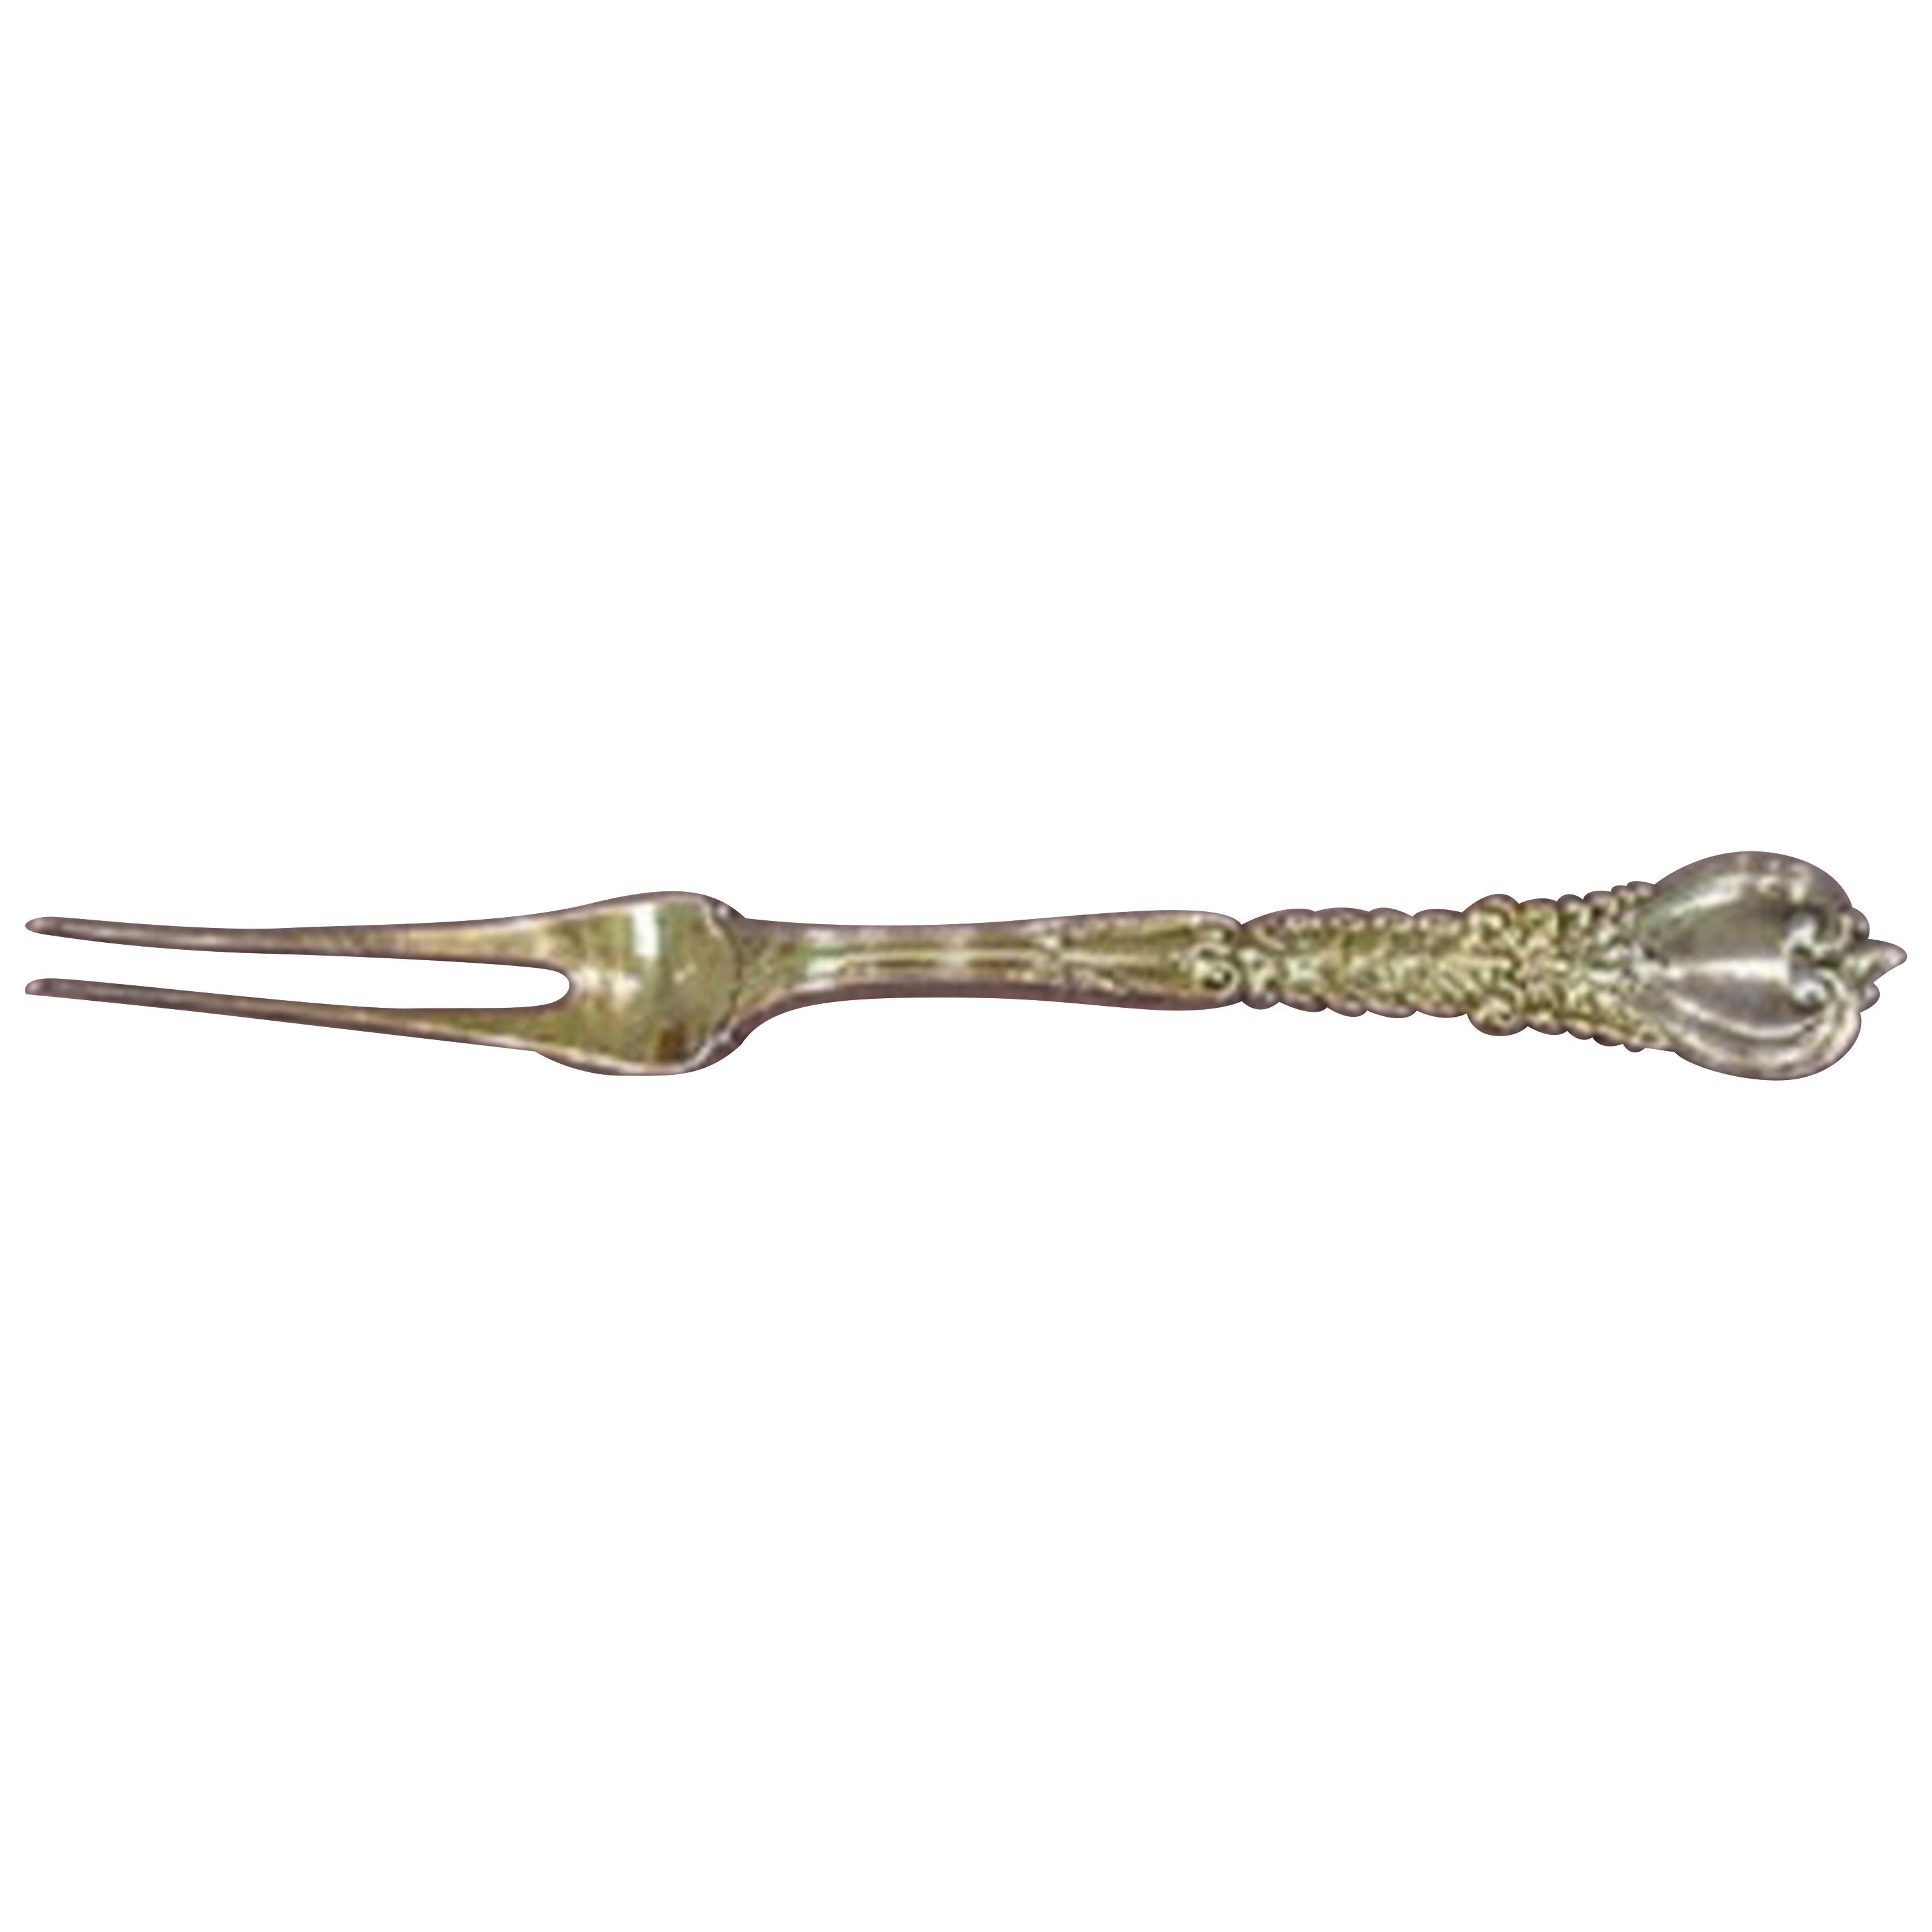 Florentine by Tiffany & Co. Sterling Silver Fruit Fork 2-Tines Vermeil